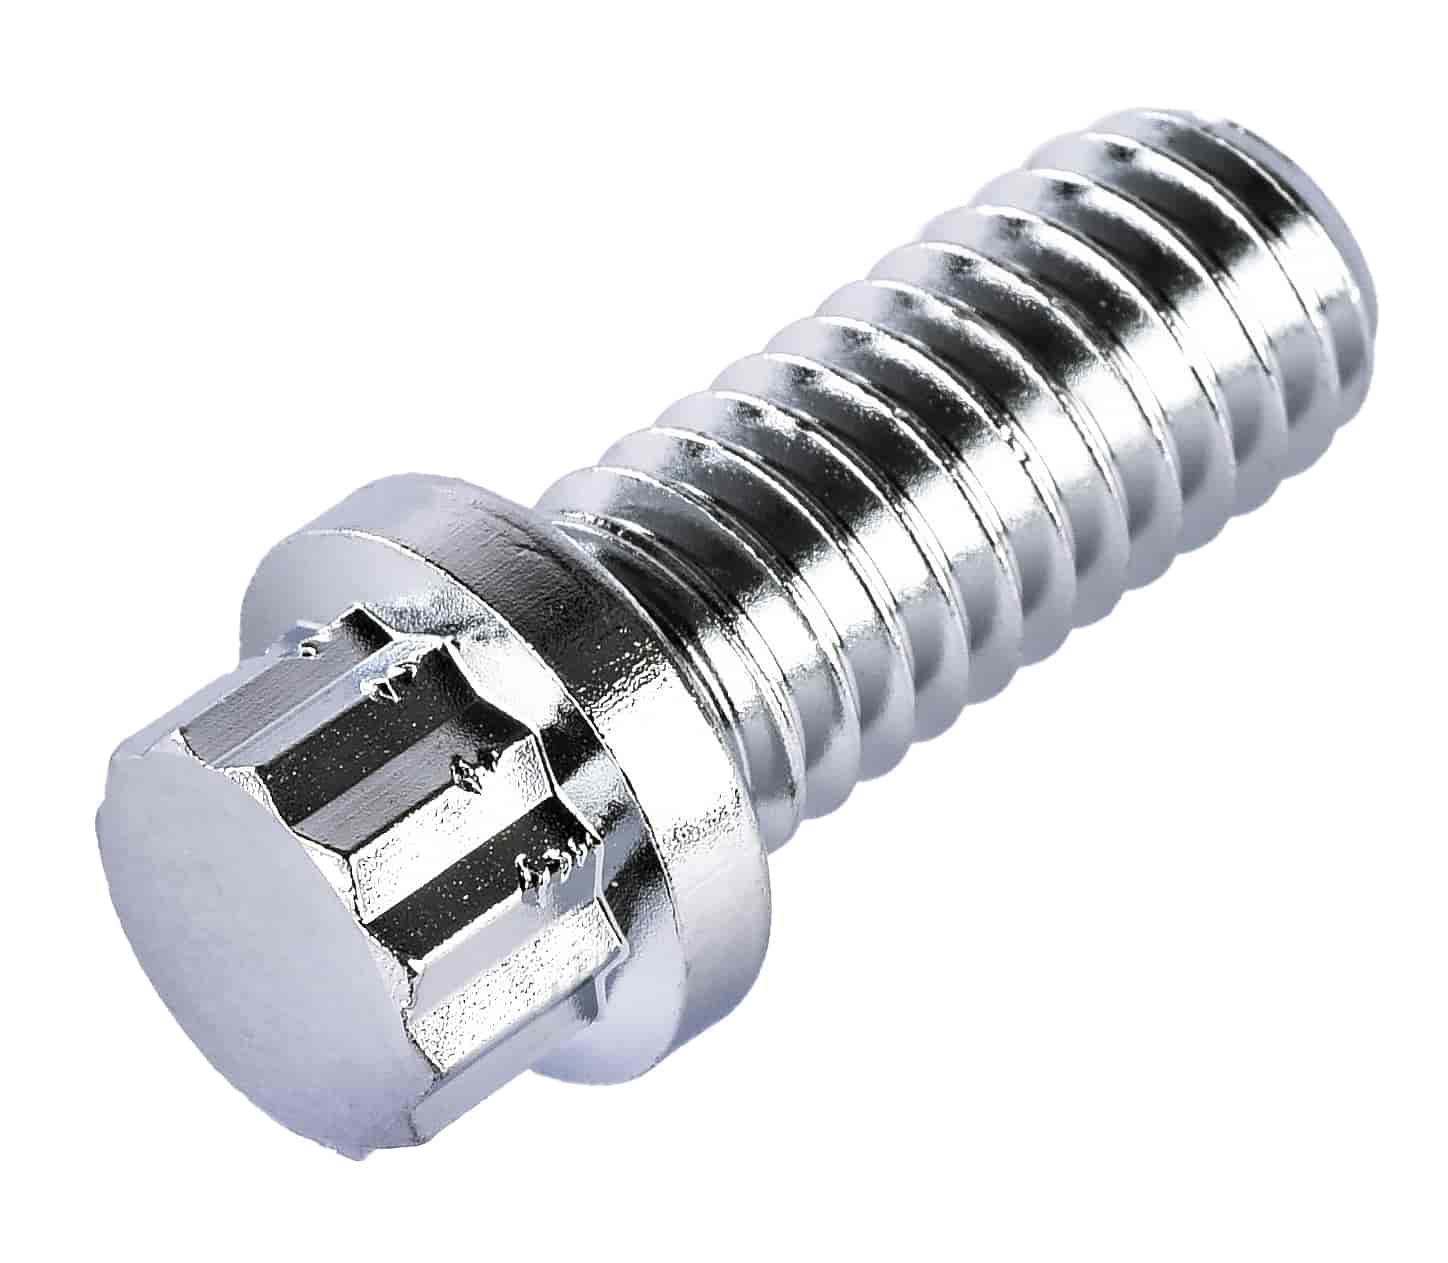 12-Point Fastener [5/16 in. -18 Thread x 3/4 (.750) in. Length]